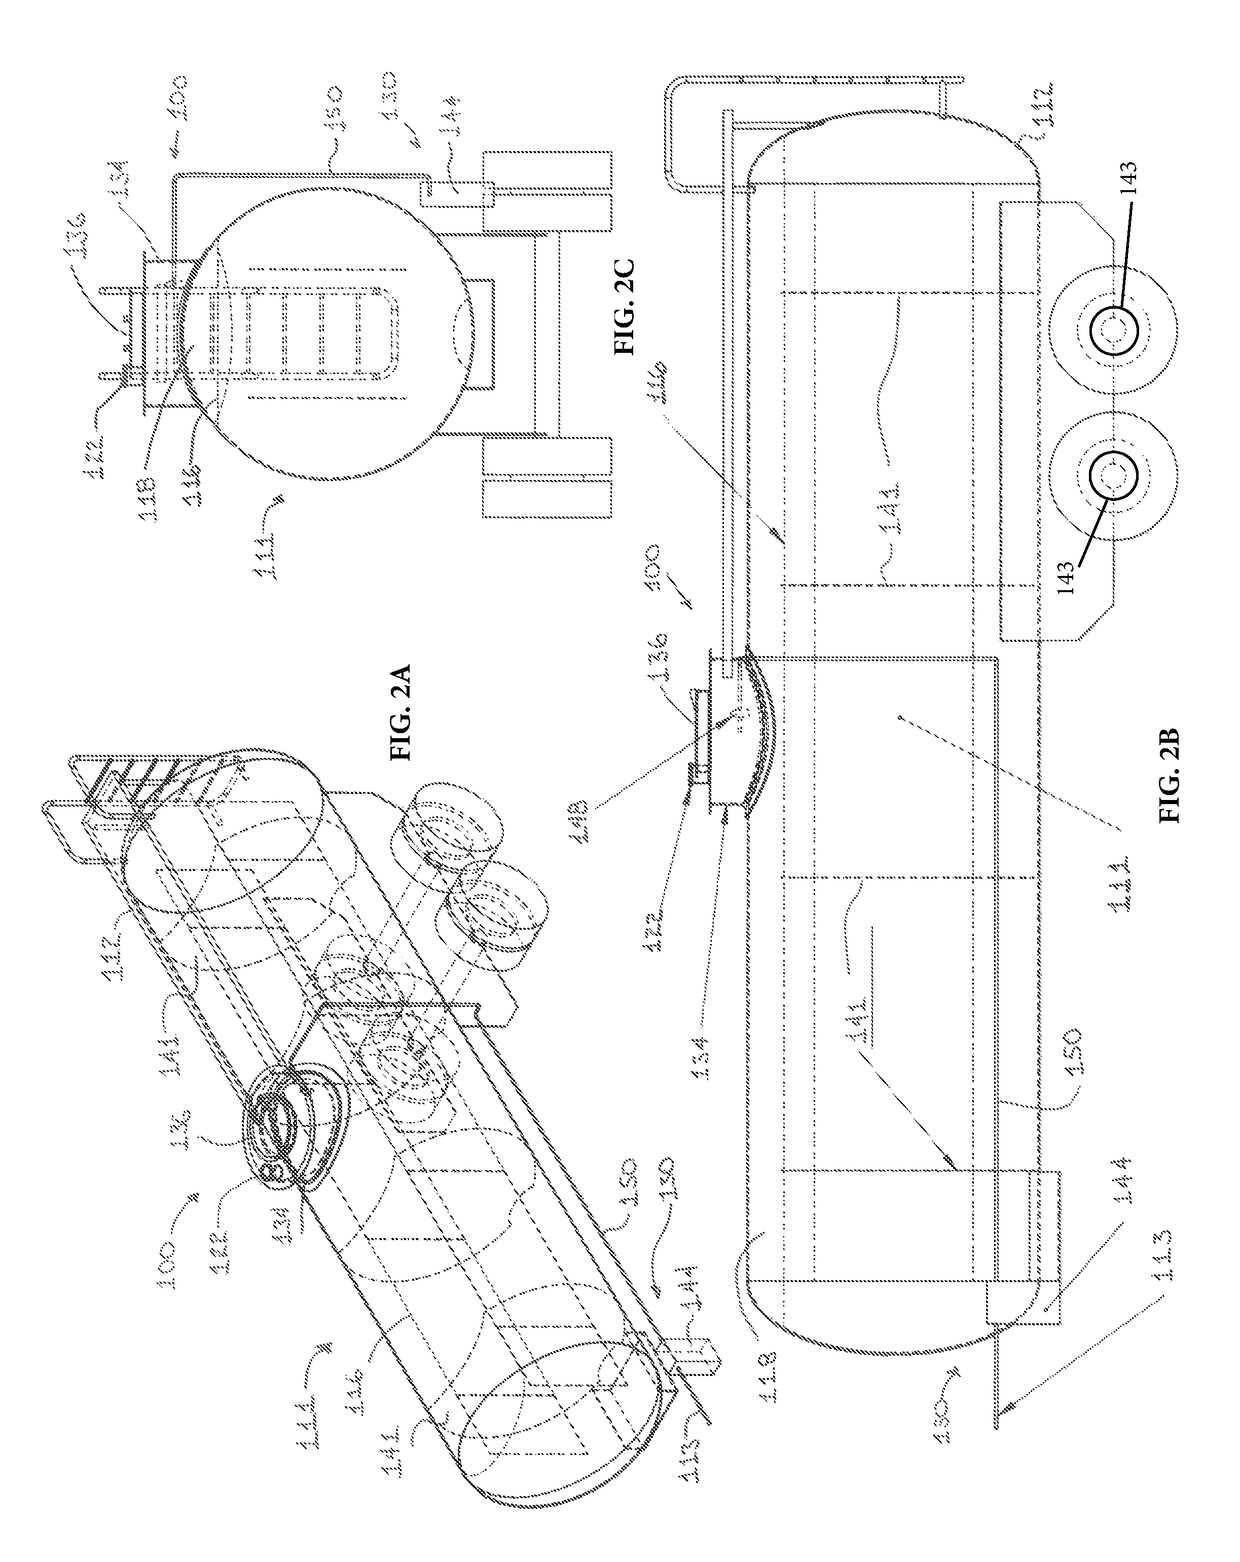 System and method for inhibiting water contamination in fuel holding tank